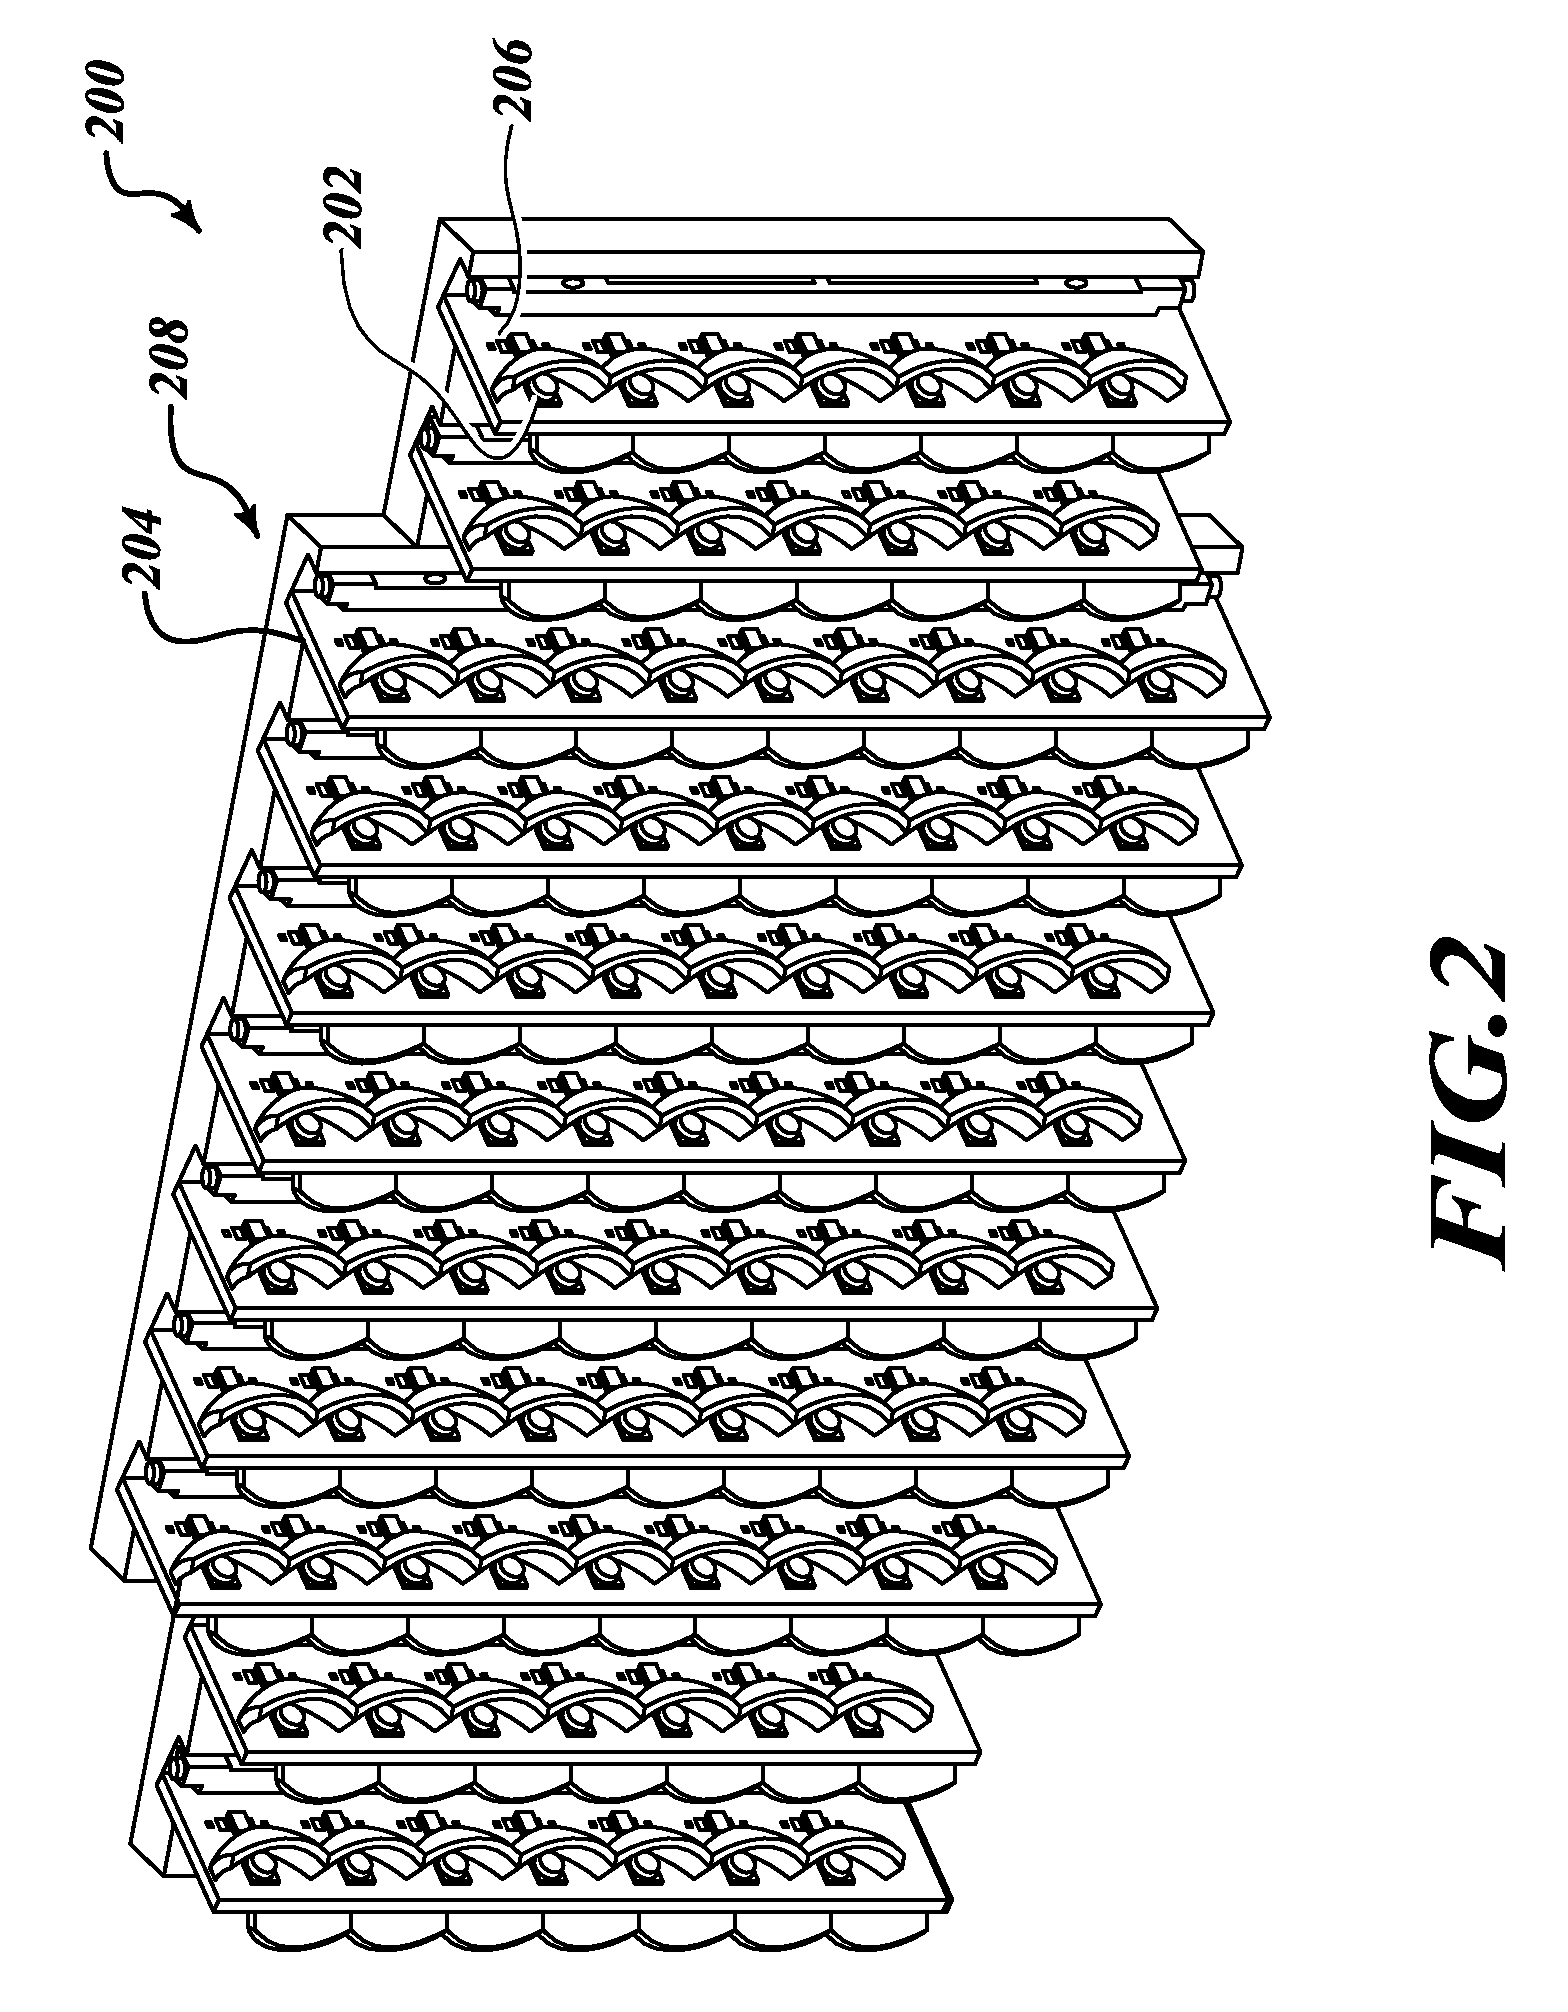 Systems and methods for a high-intensity light emitting diode floodlight